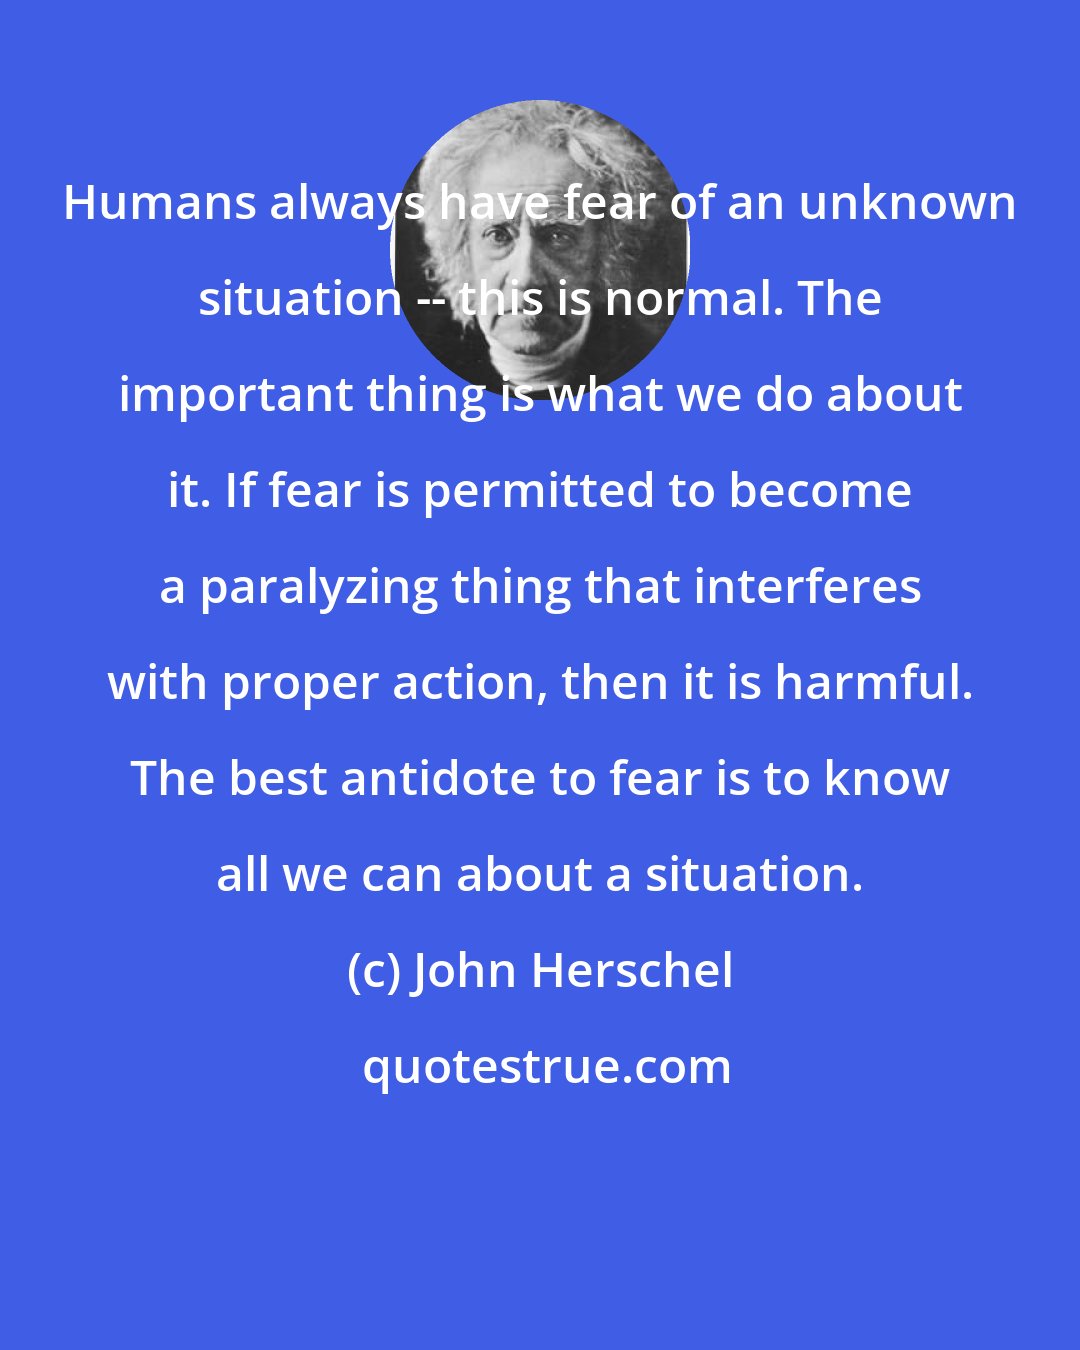 John Herschel: Humans always have fear of an unknown situation -- this is normal. The important thing is what we do about it. If fear is permitted to become a paralyzing thing that interferes with proper action, then it is harmful. The best antidote to fear is to know all we can about a situation.